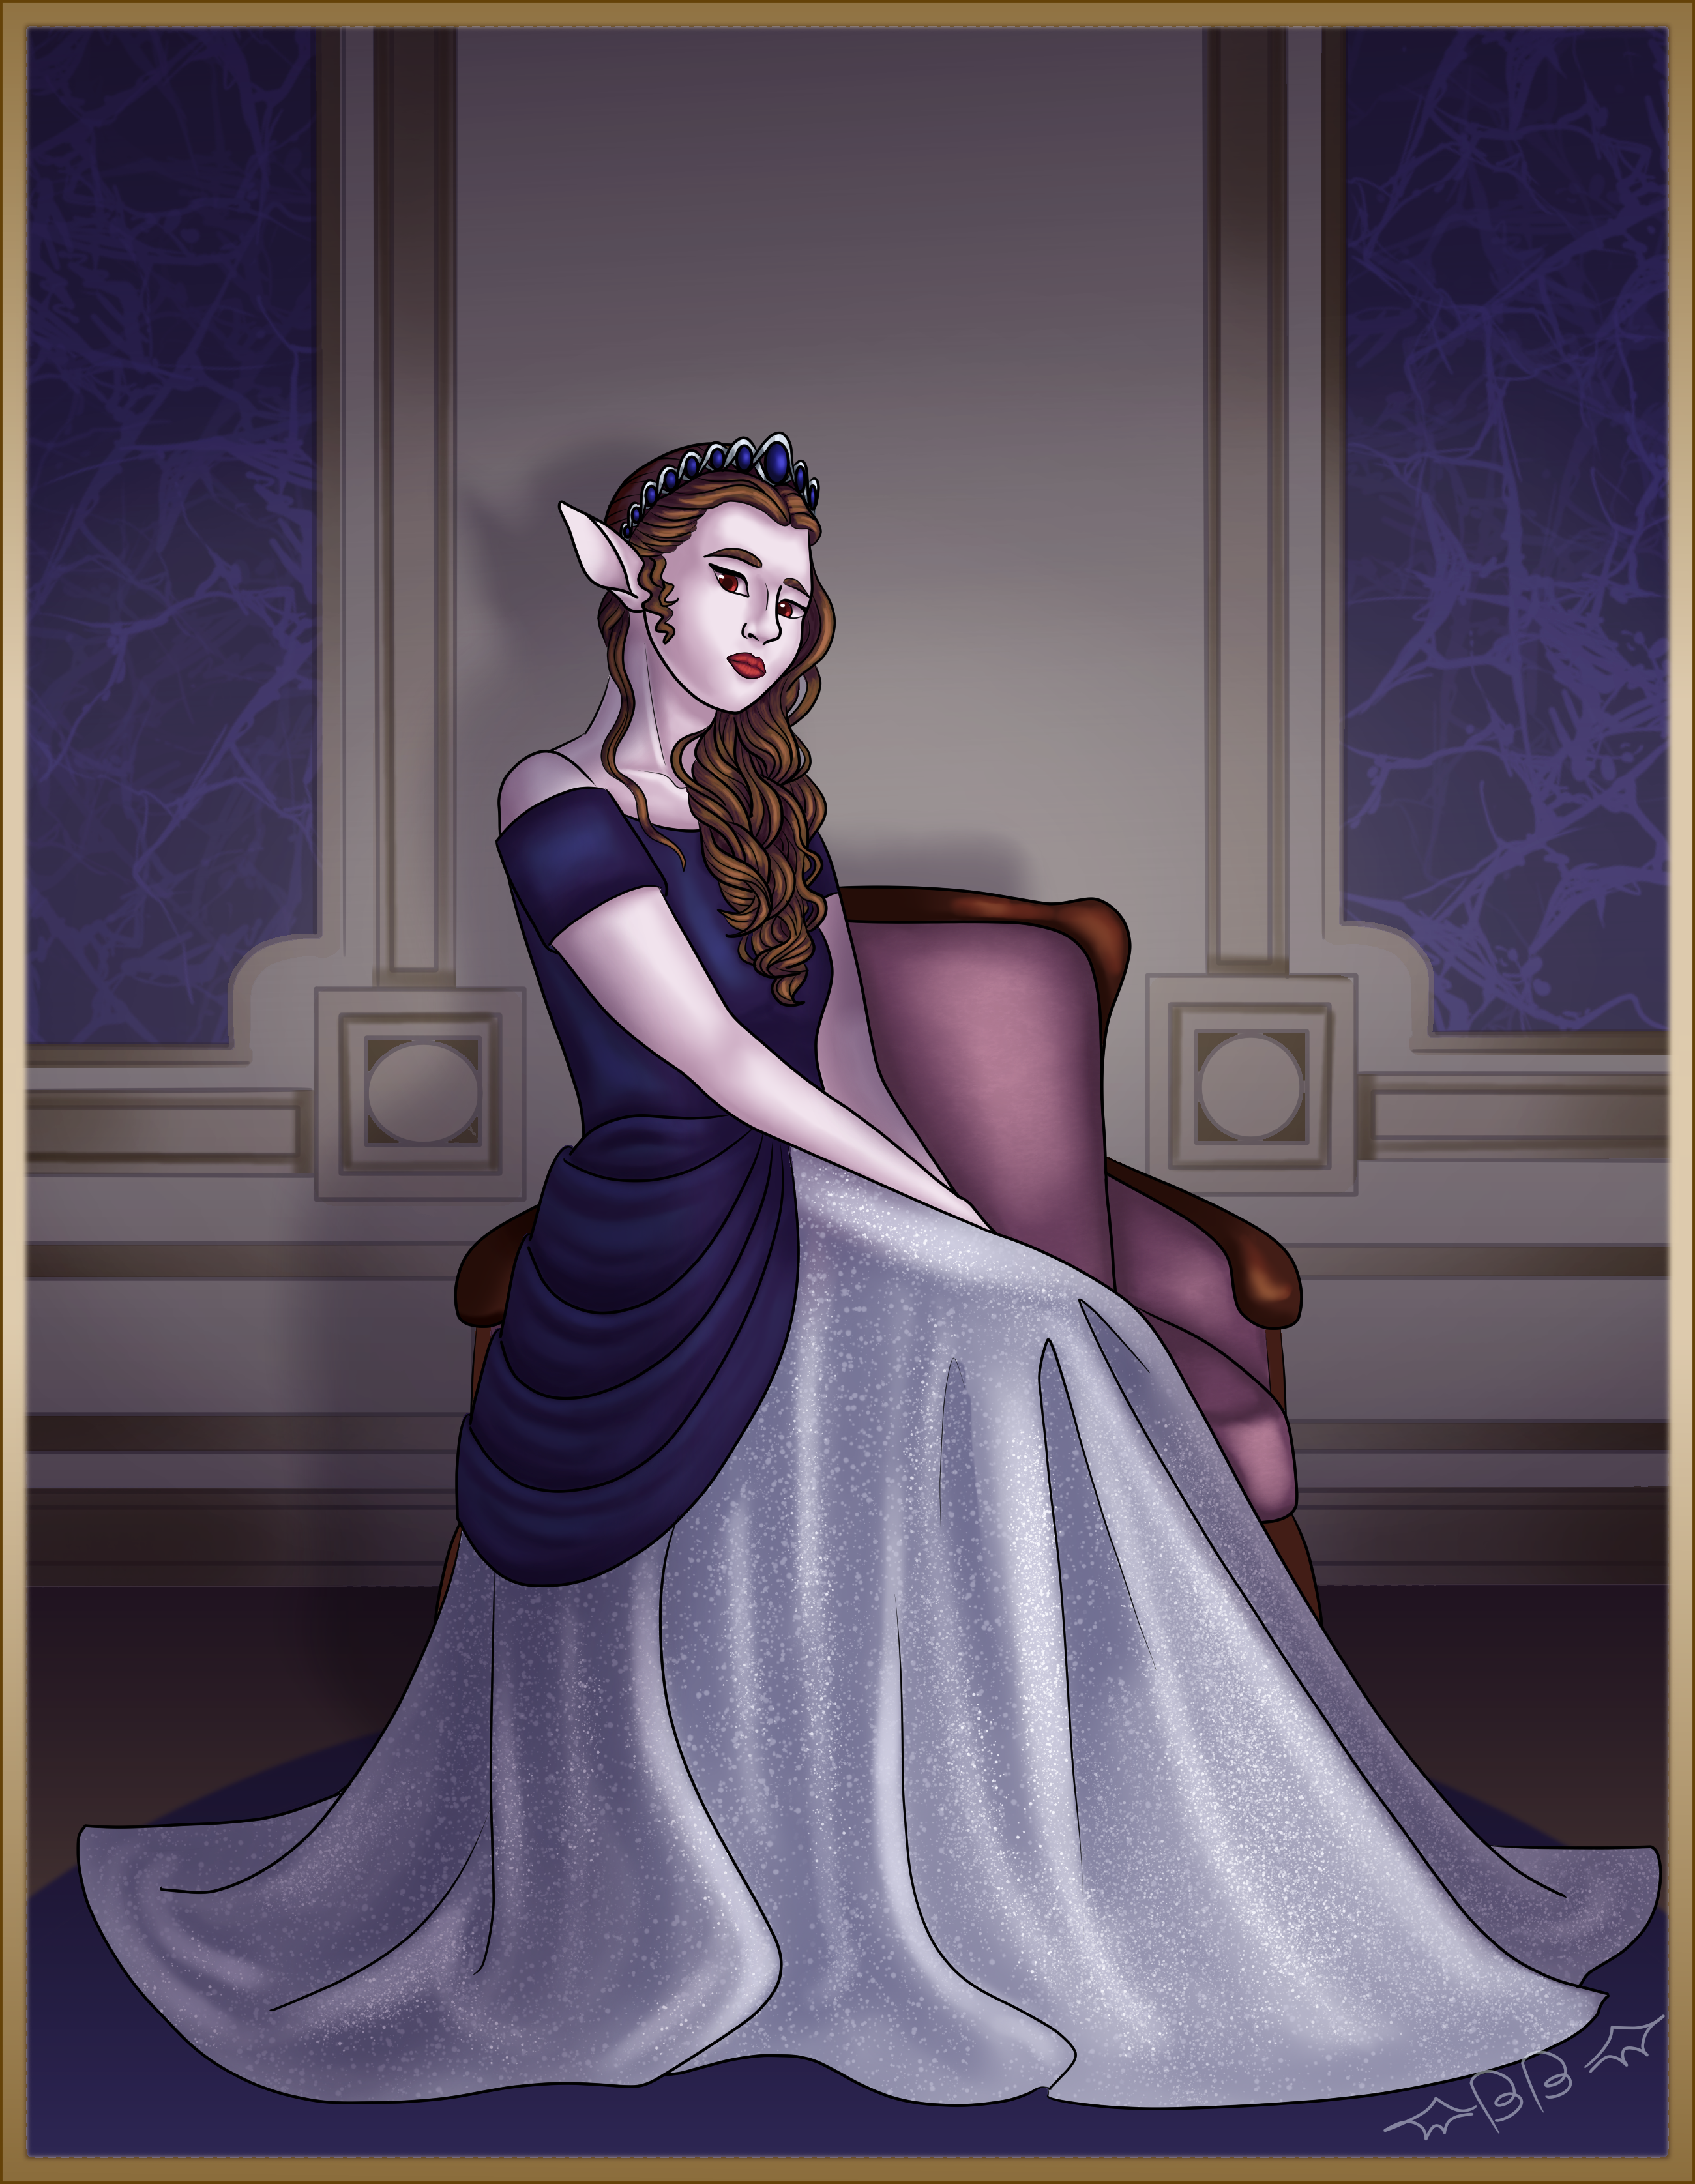 The regal, vampire queen Alayne seated in the palace